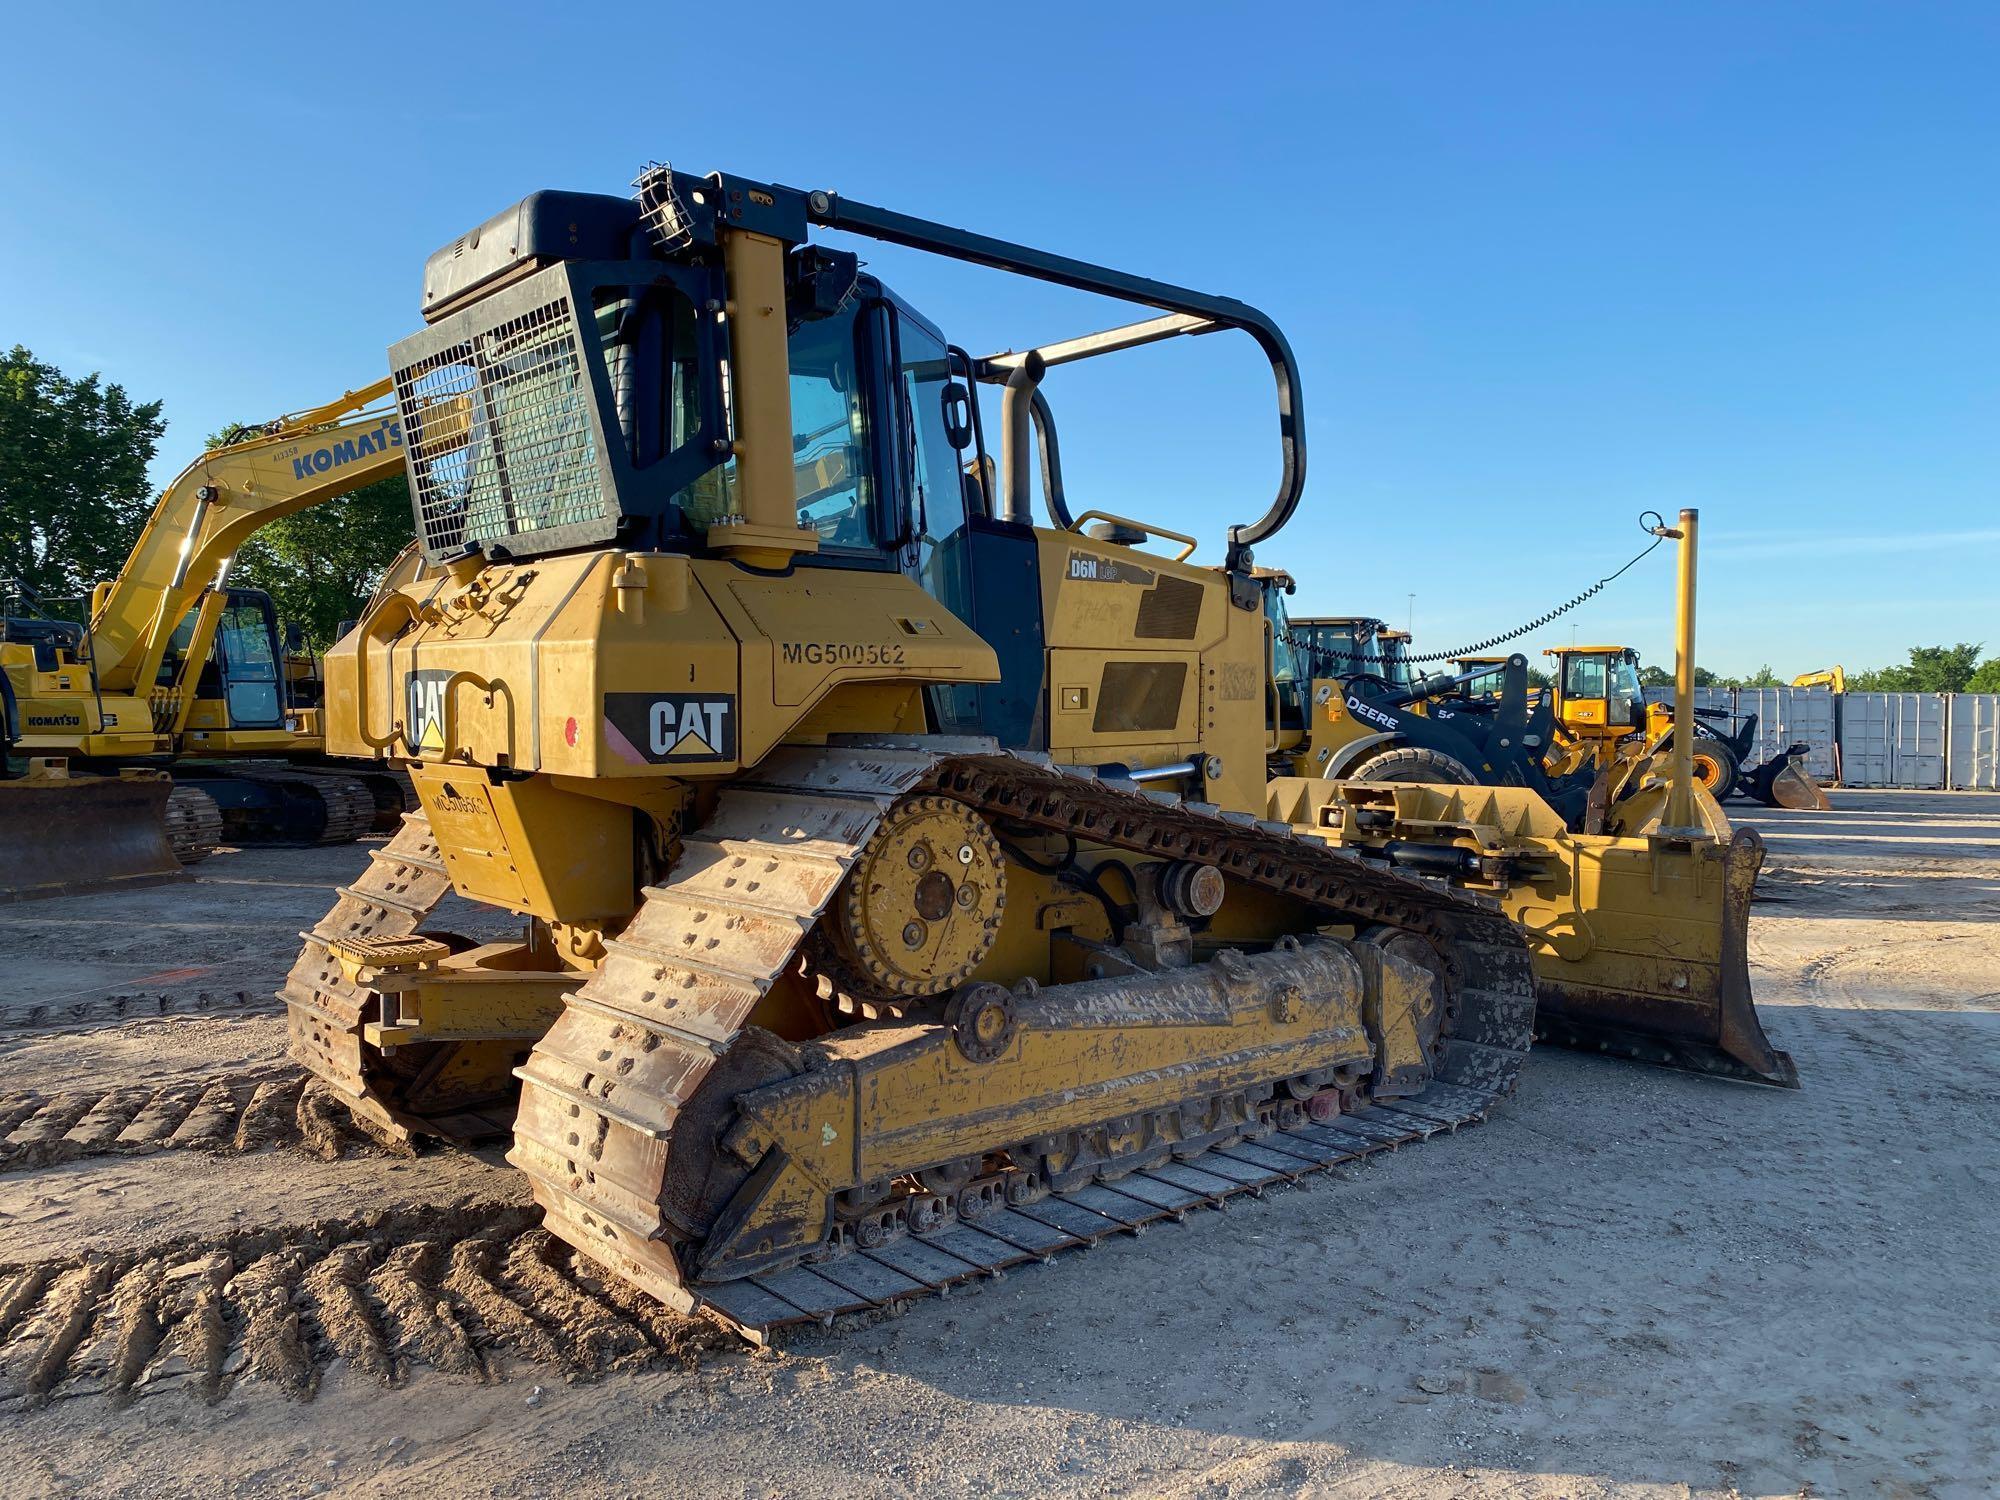 2016 CAT D6NLGP CRAWLER TRACTOR SN:MG500562 powered by Cat diesel engine, equipped with EROPS, air,